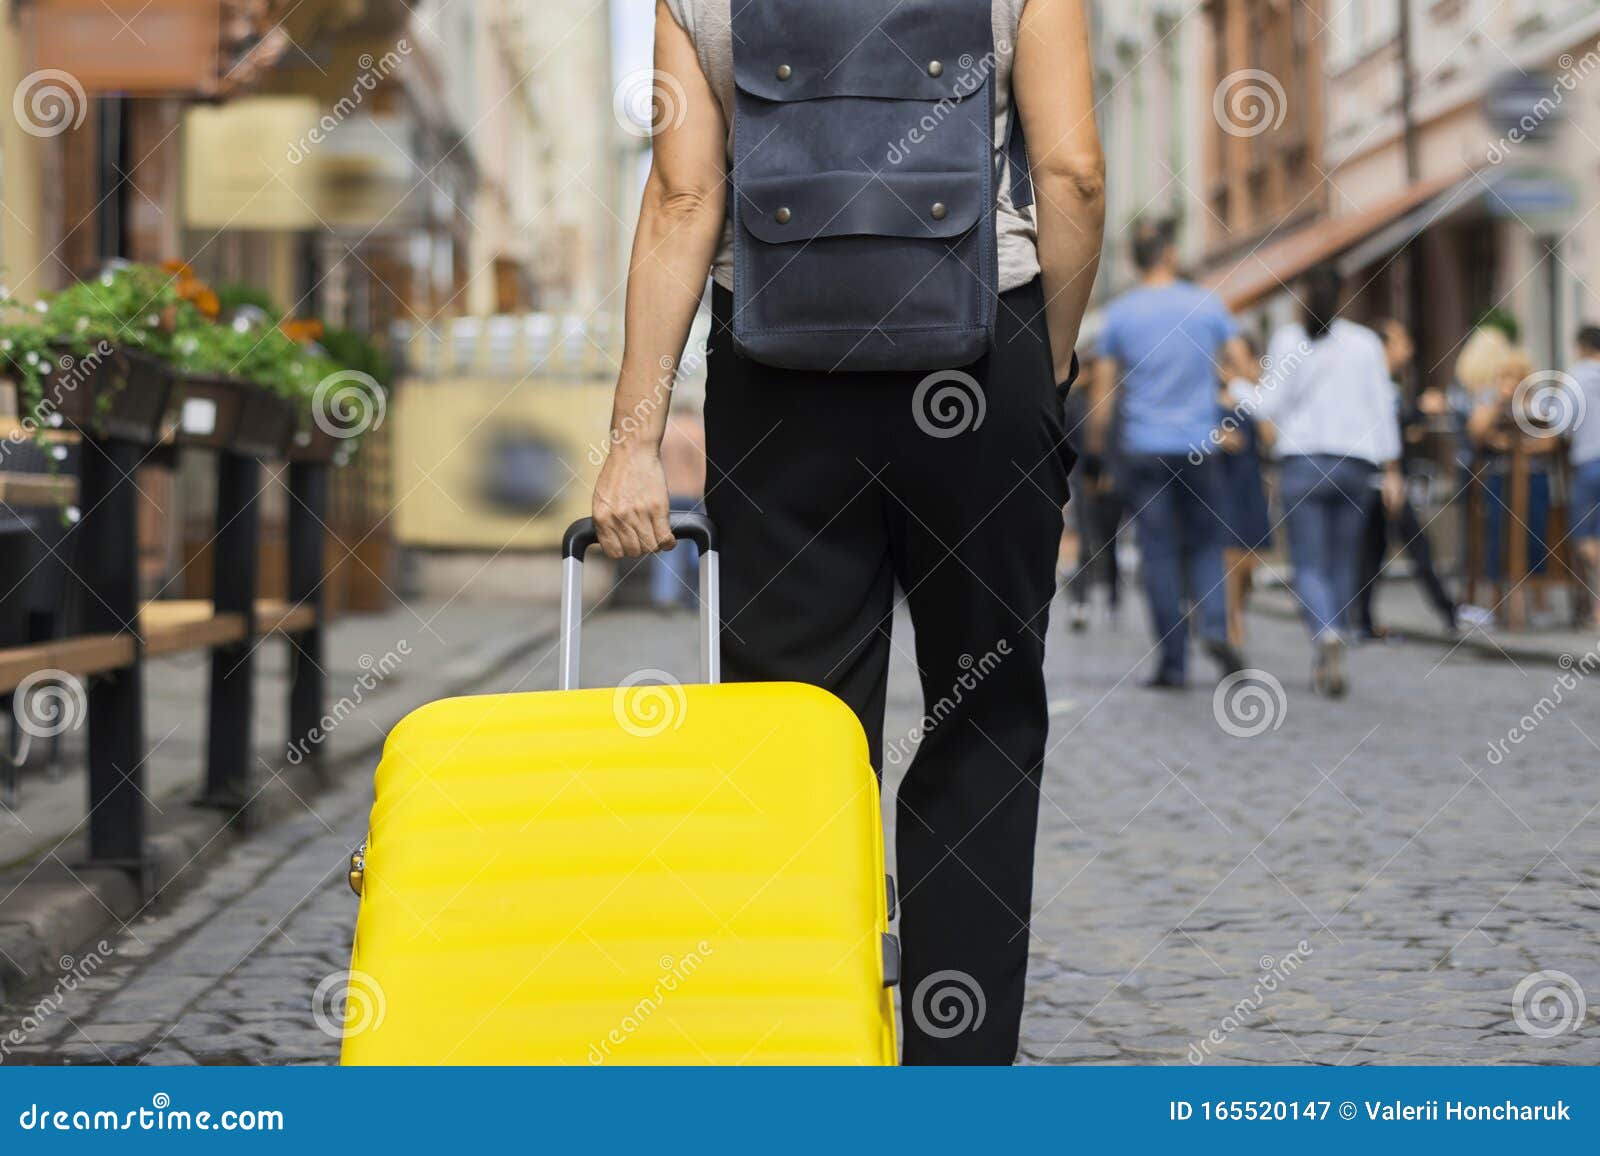 luggage travel tourism concept, closeup of yellow suitcase in hand of walking woman